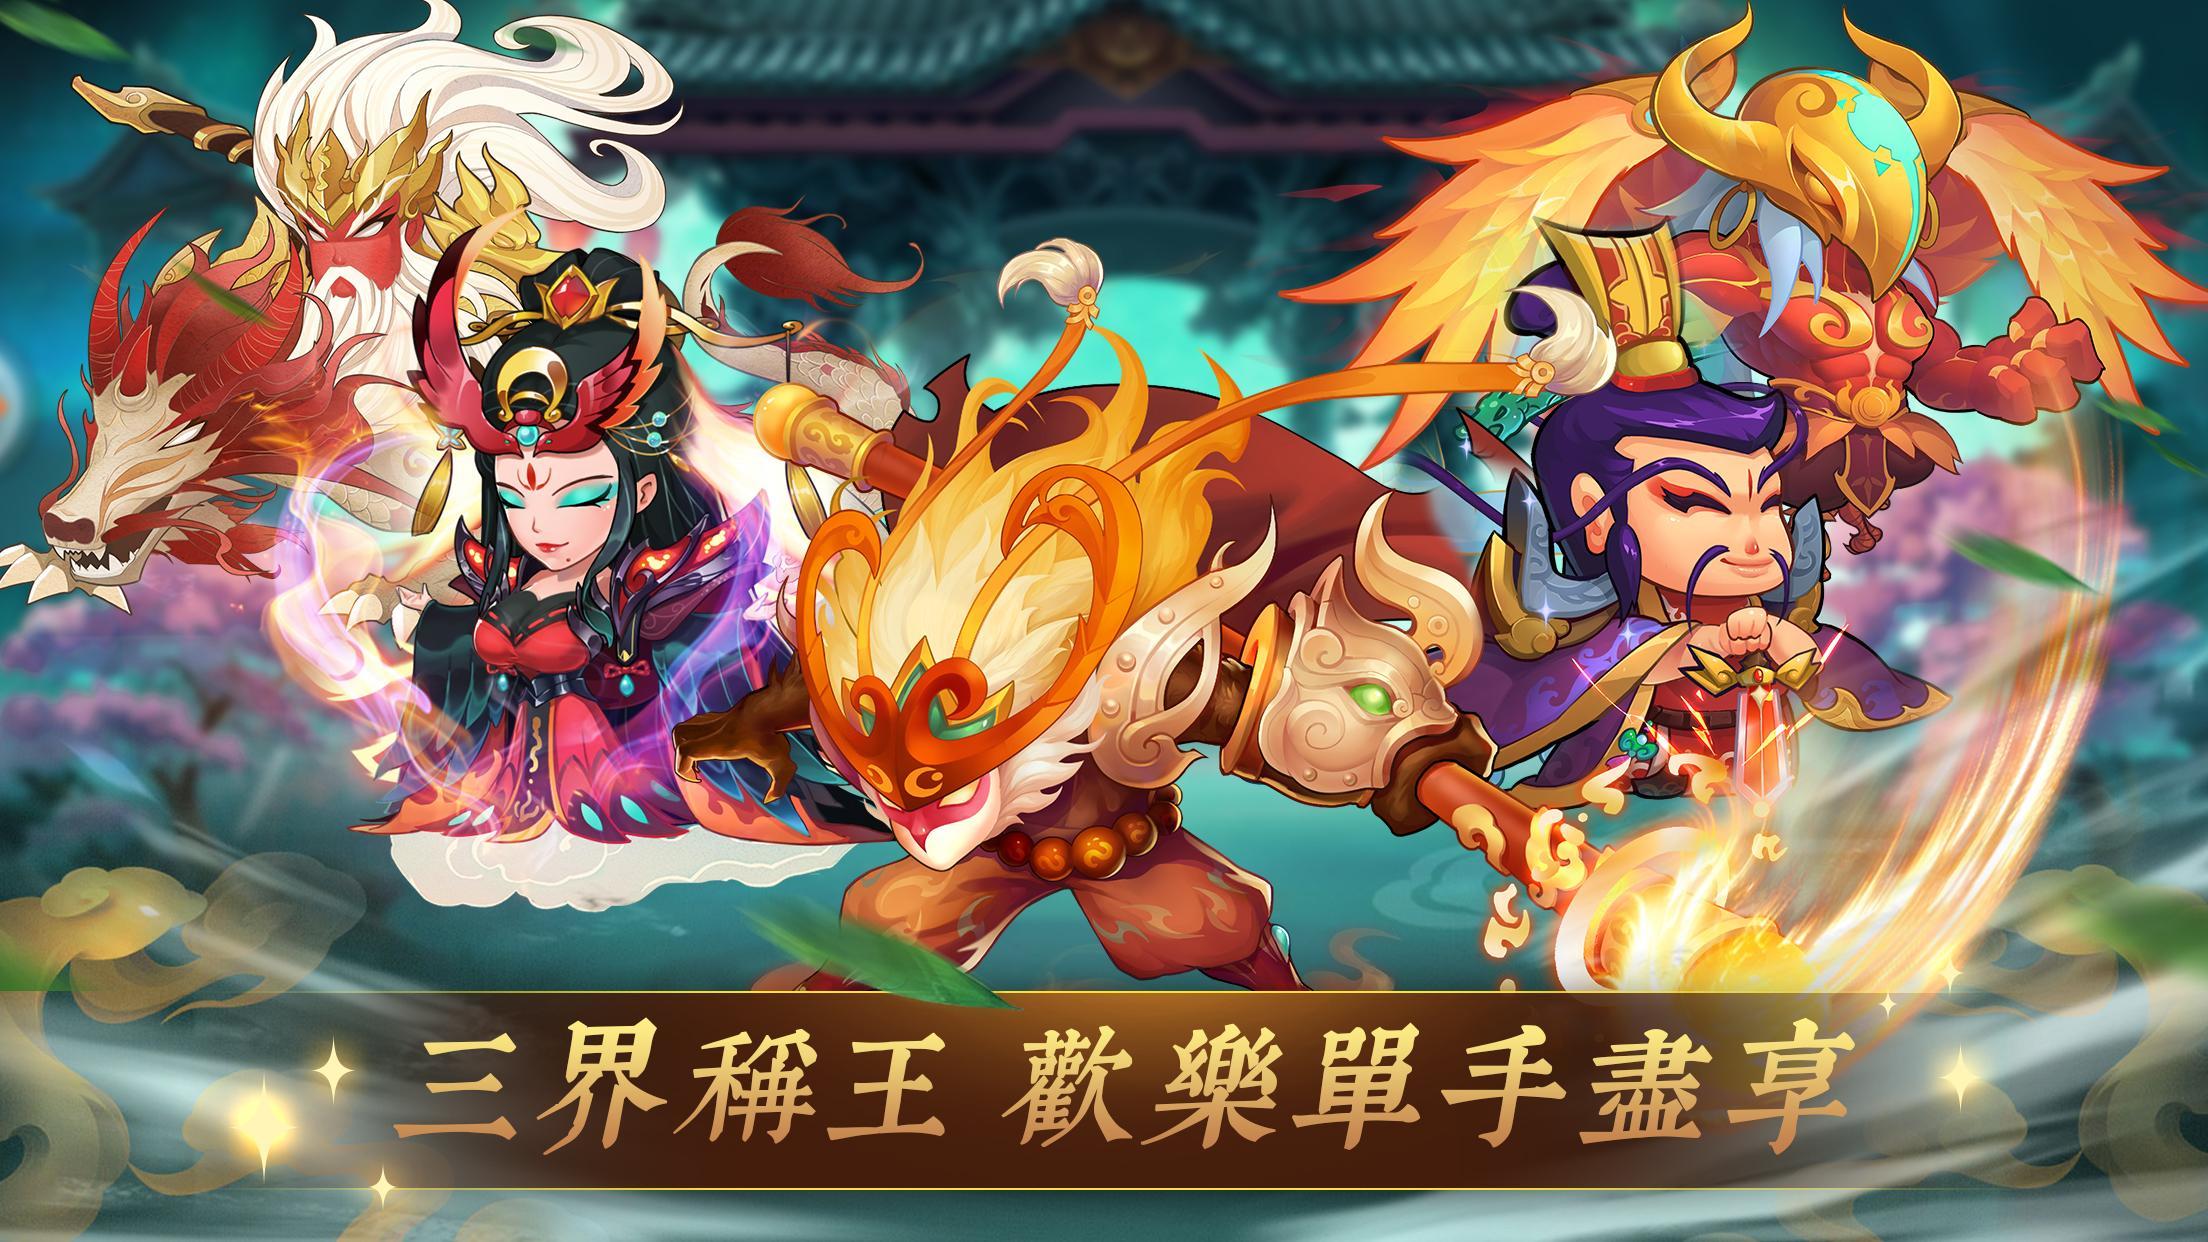 Screenshot 1 of Awakening of Gods and Demons - Journey to the West of the Three Kingdoms RPG mobile game 1.1.4